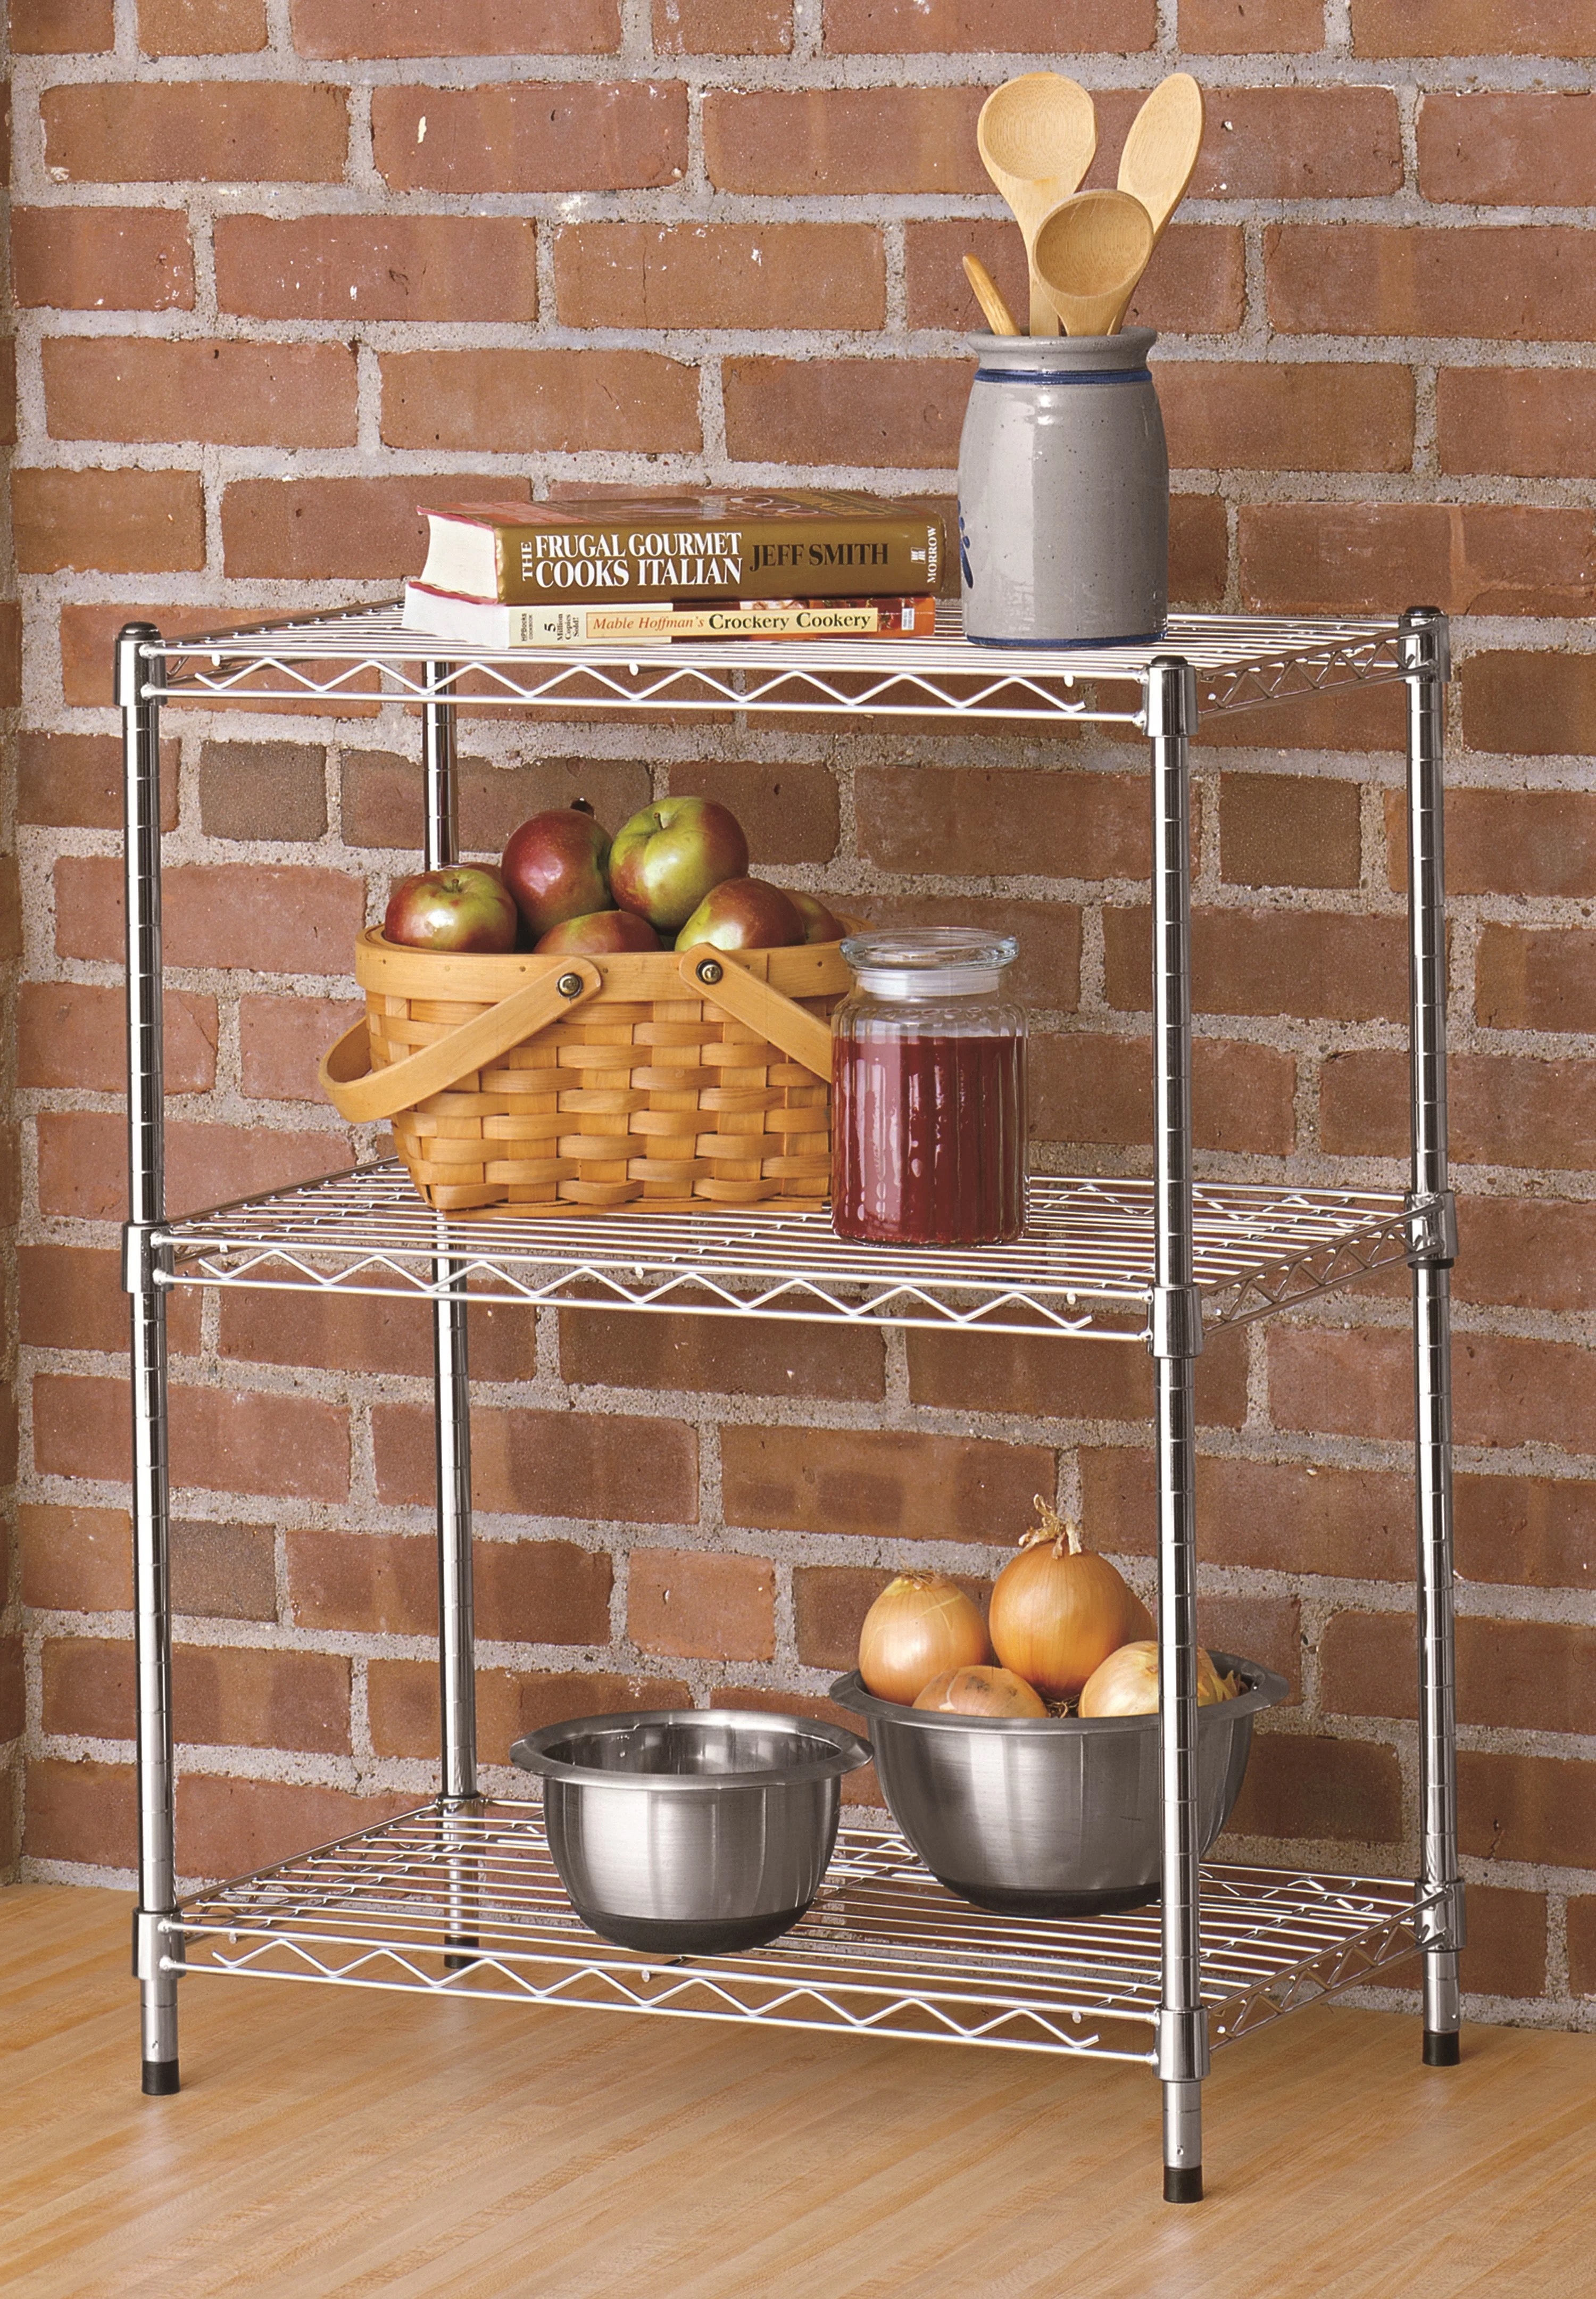 the chrome wire shelf with kitchen supplies on it